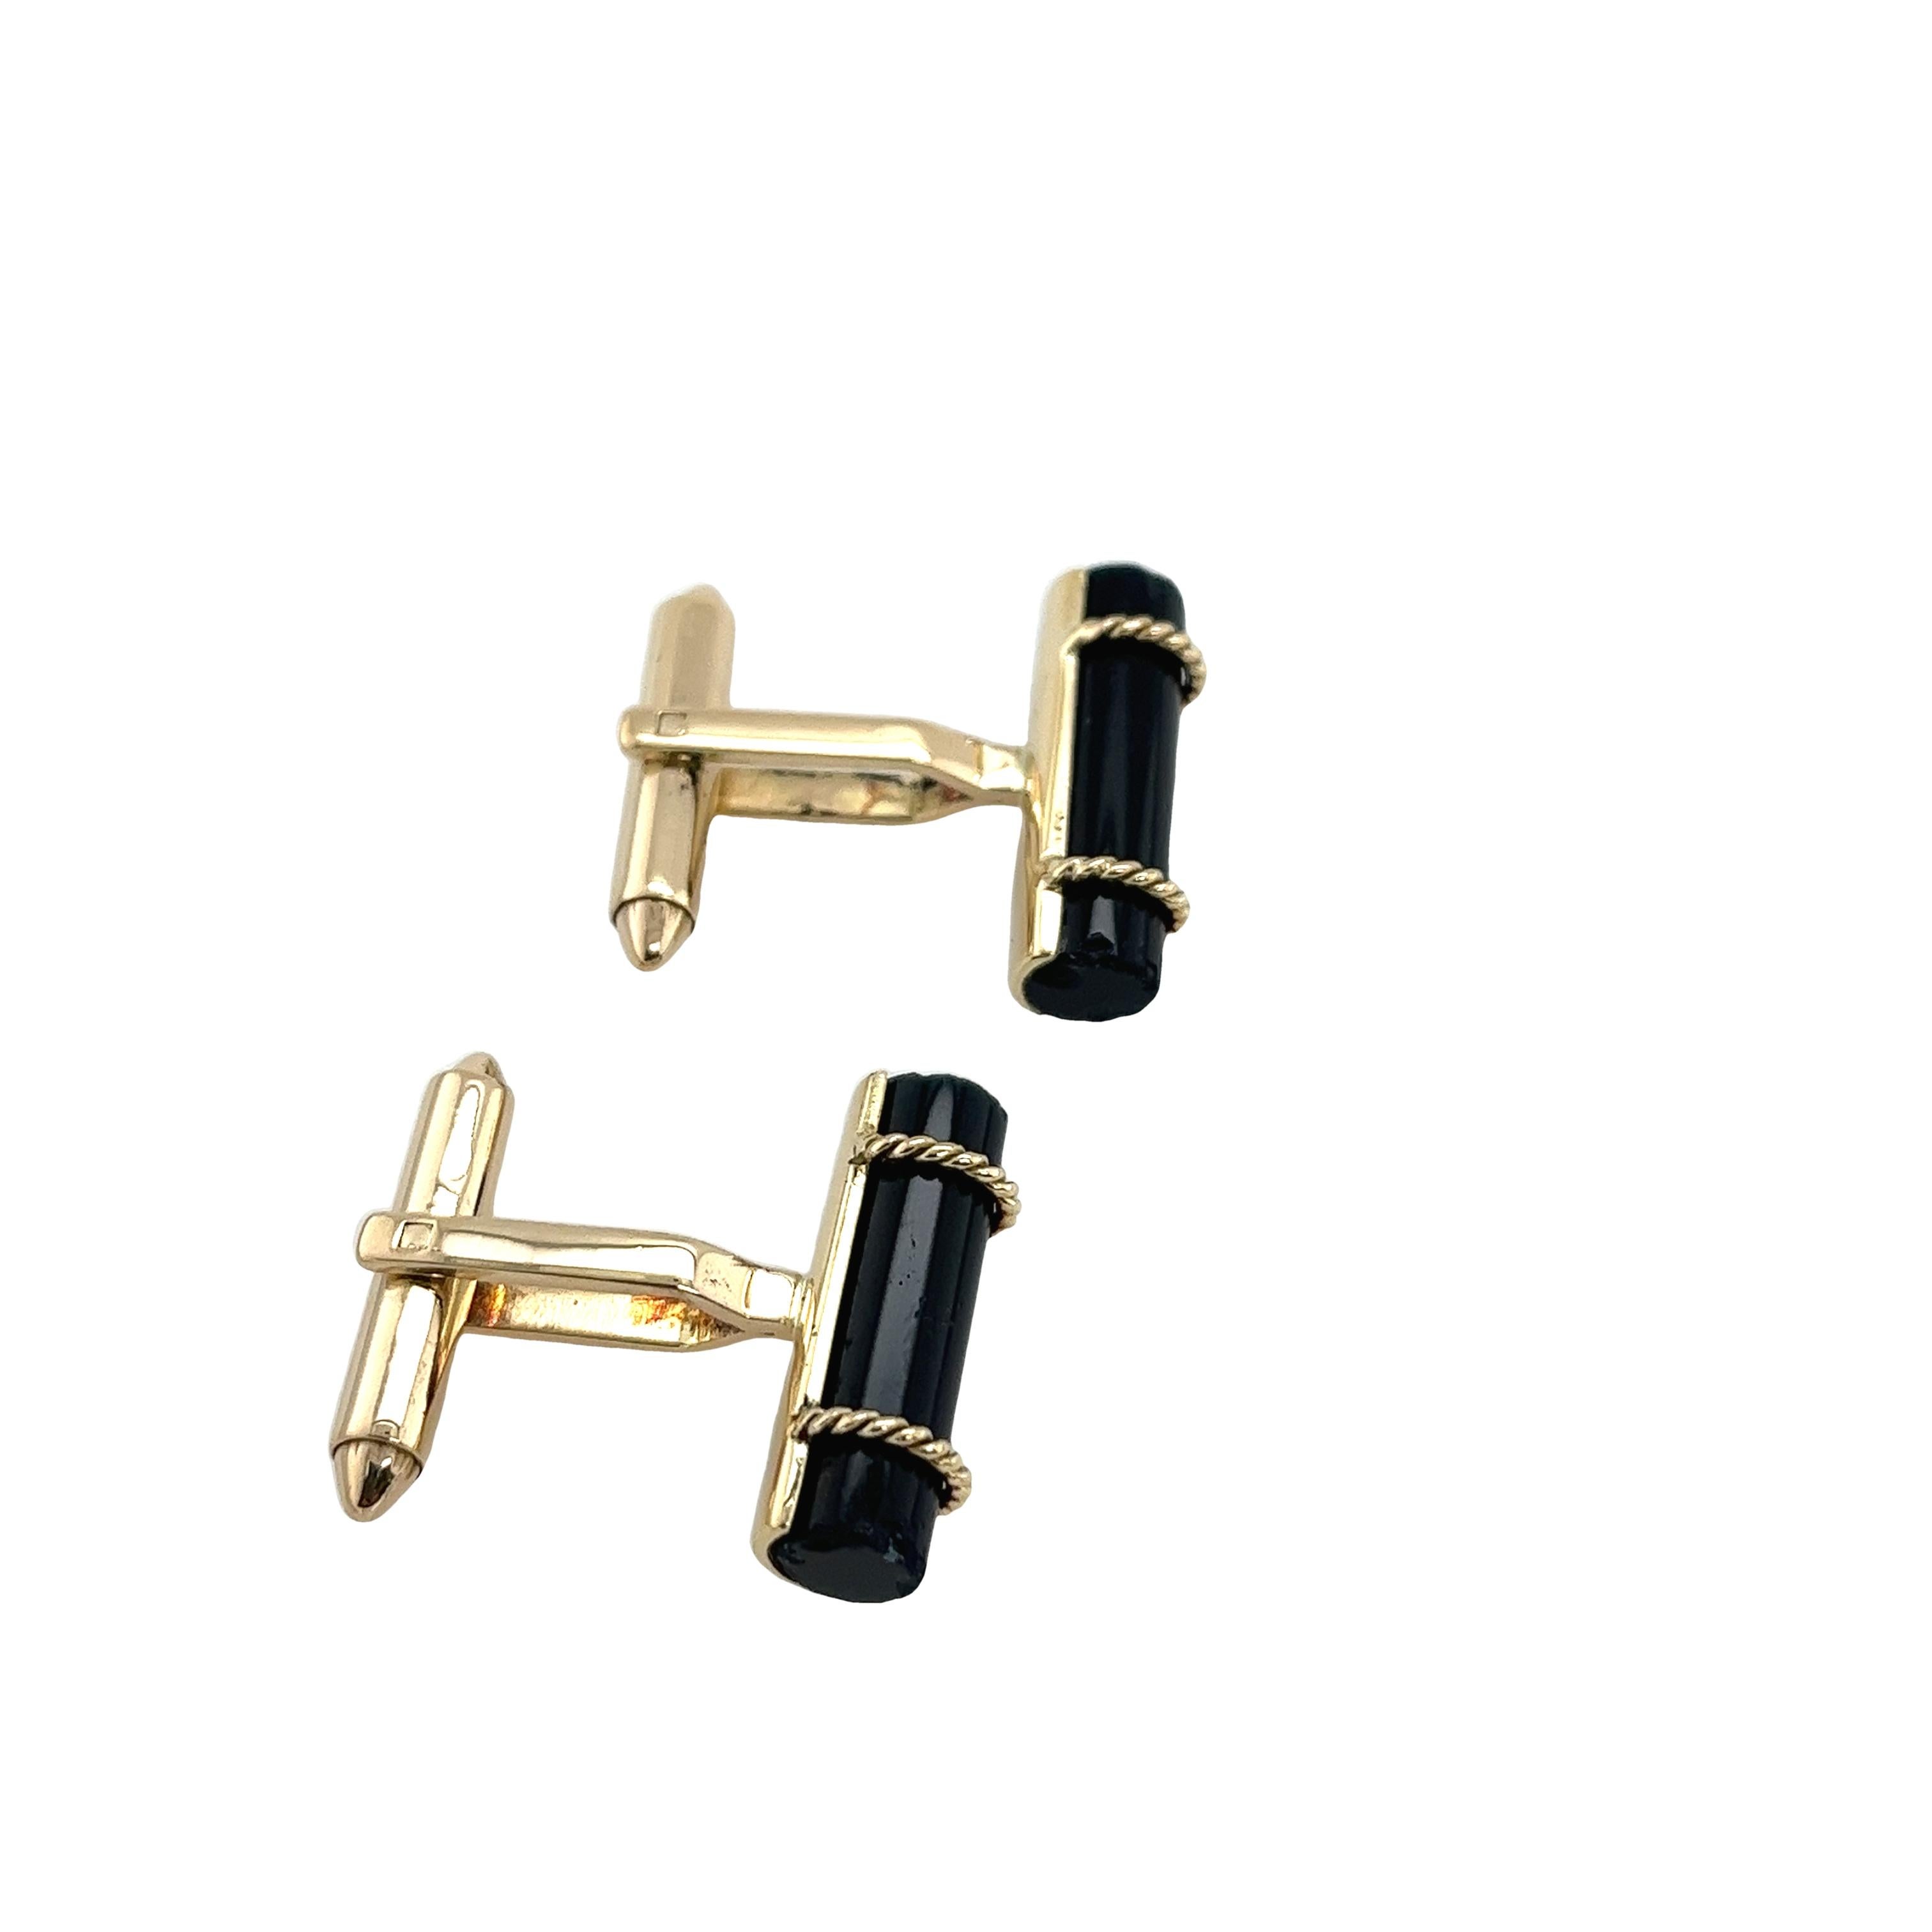 These stunning vintage 14ct  yellow gold cufflinks black onyx in a lovely design that is sure to catch attention.
Total Gold Weight: 9.3g 
Item Dimension: 23.95mm x 20.25mm

SMS9165